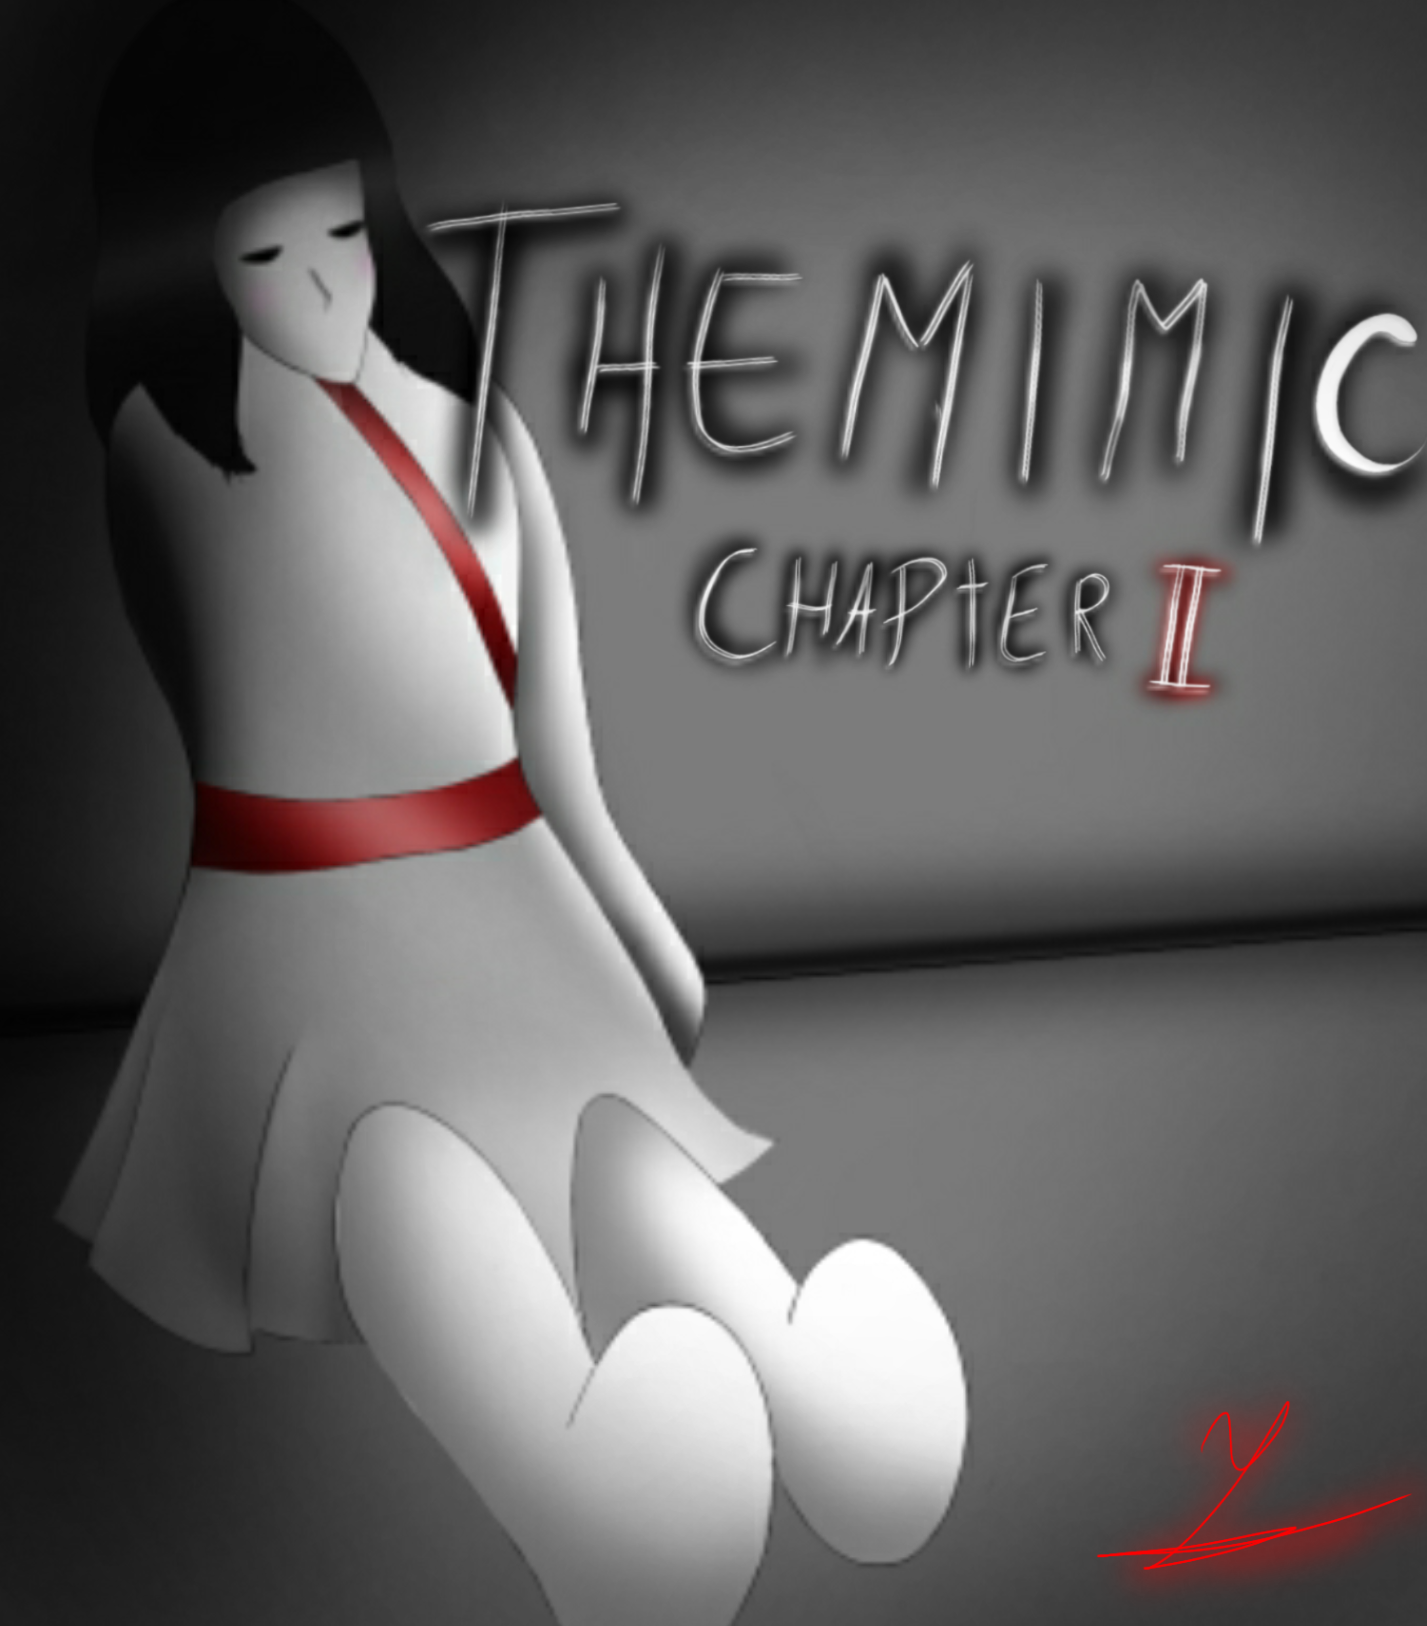 A NEW BEGINNING ROBLOX  THE MIMIC CHAPTER 2 - BiliBili